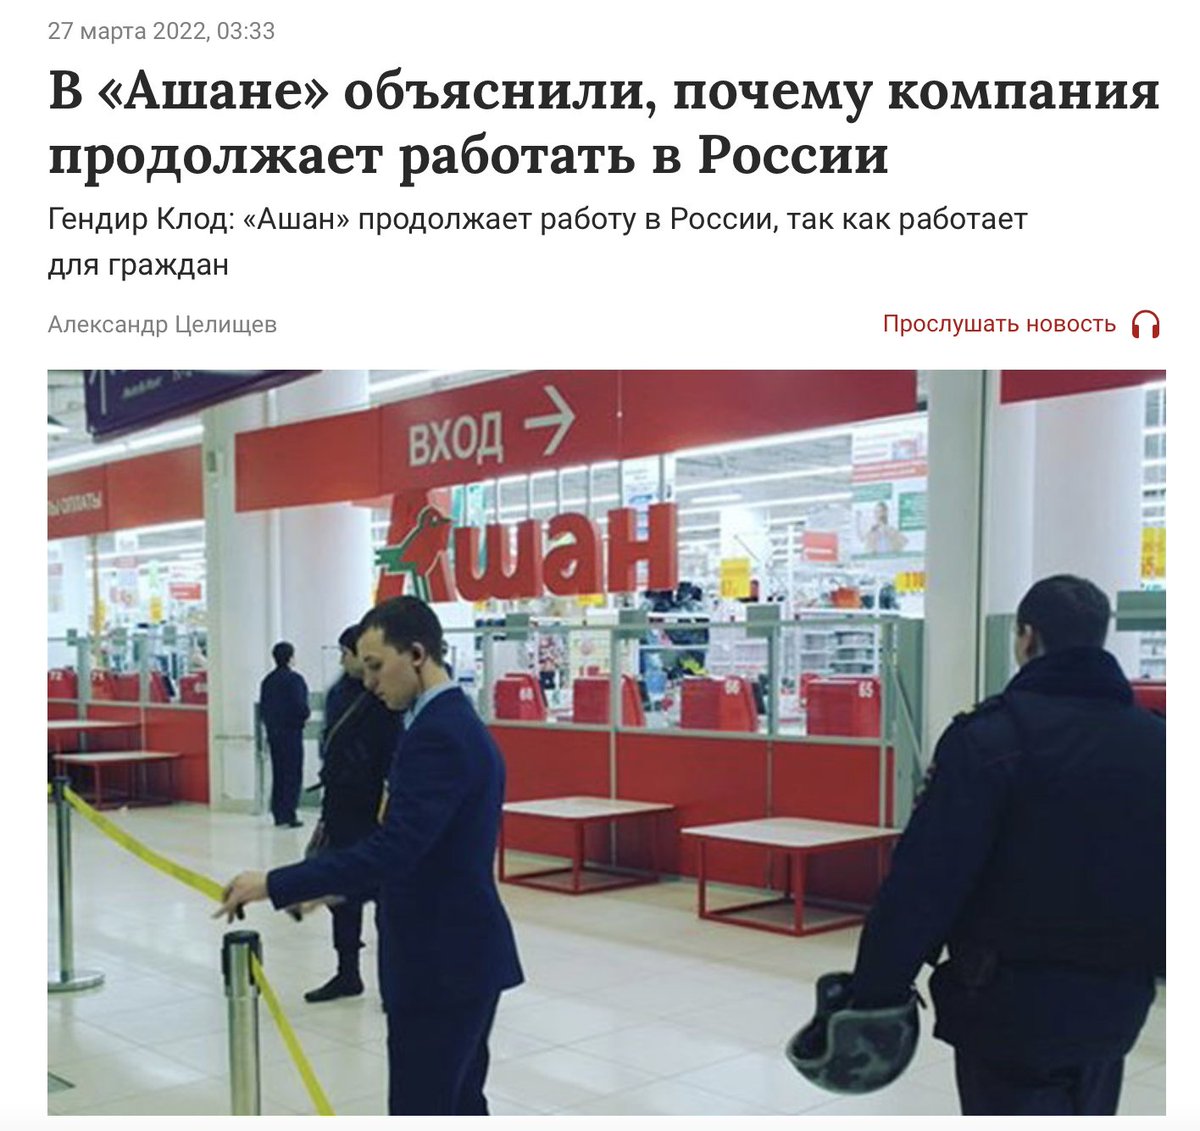 3. Make public pressure on Western companies that refuse to leave the Russian market. French supermarket chain Auchan, and German Globus told they aren't leaving. Pressure them publicly, make it impossible for them to remain. That's important for increasing the systemic shock